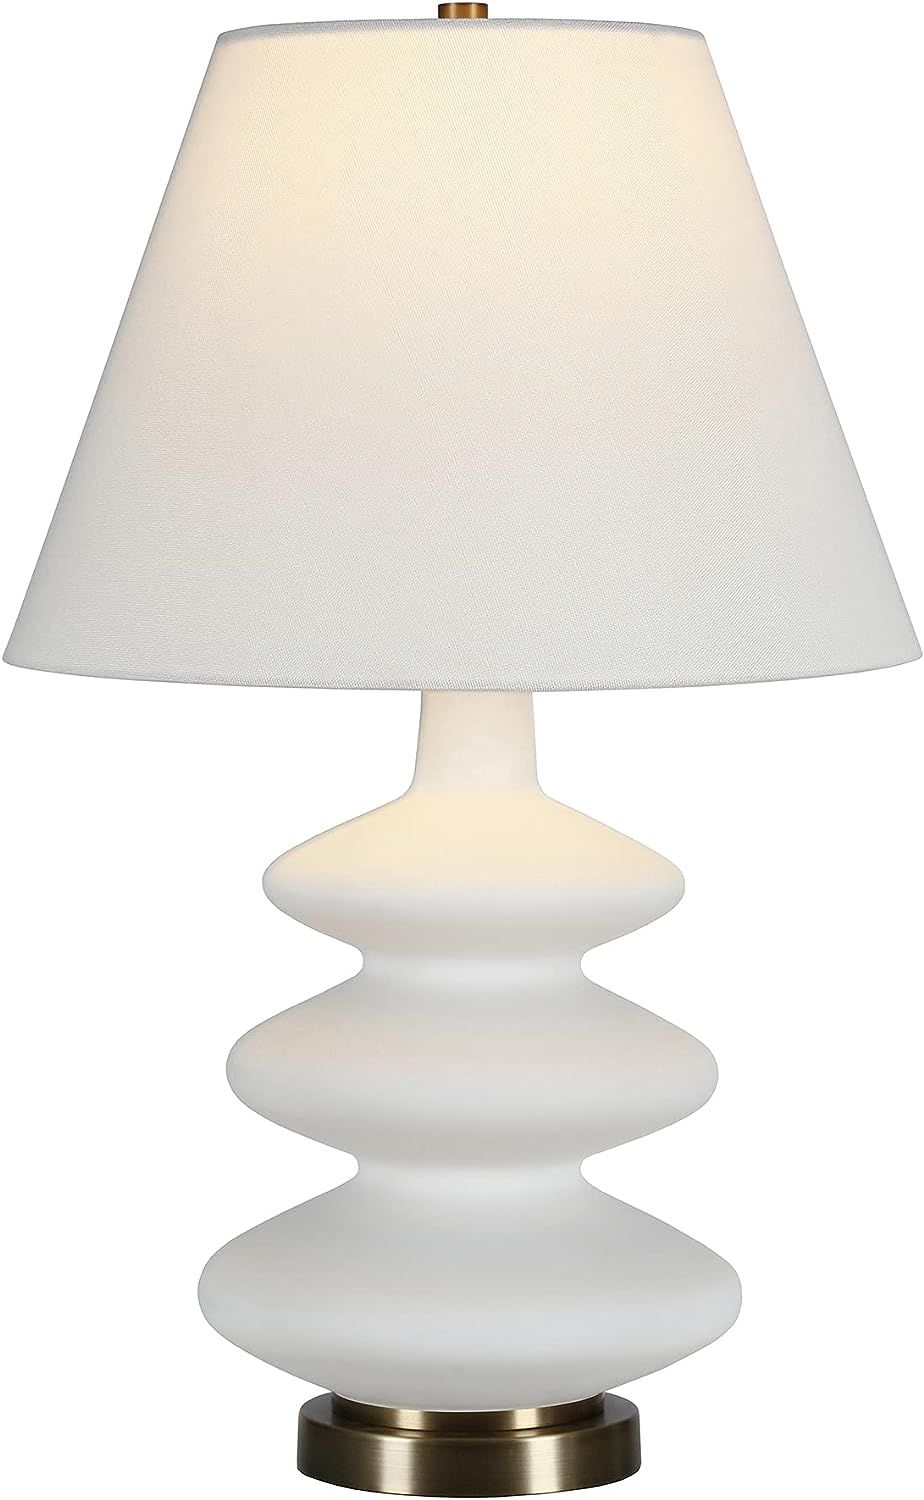 Carleta 26.5" Tall Triple Gourd Table Lamp with Fabric Shade in White/White | Amazon (US)